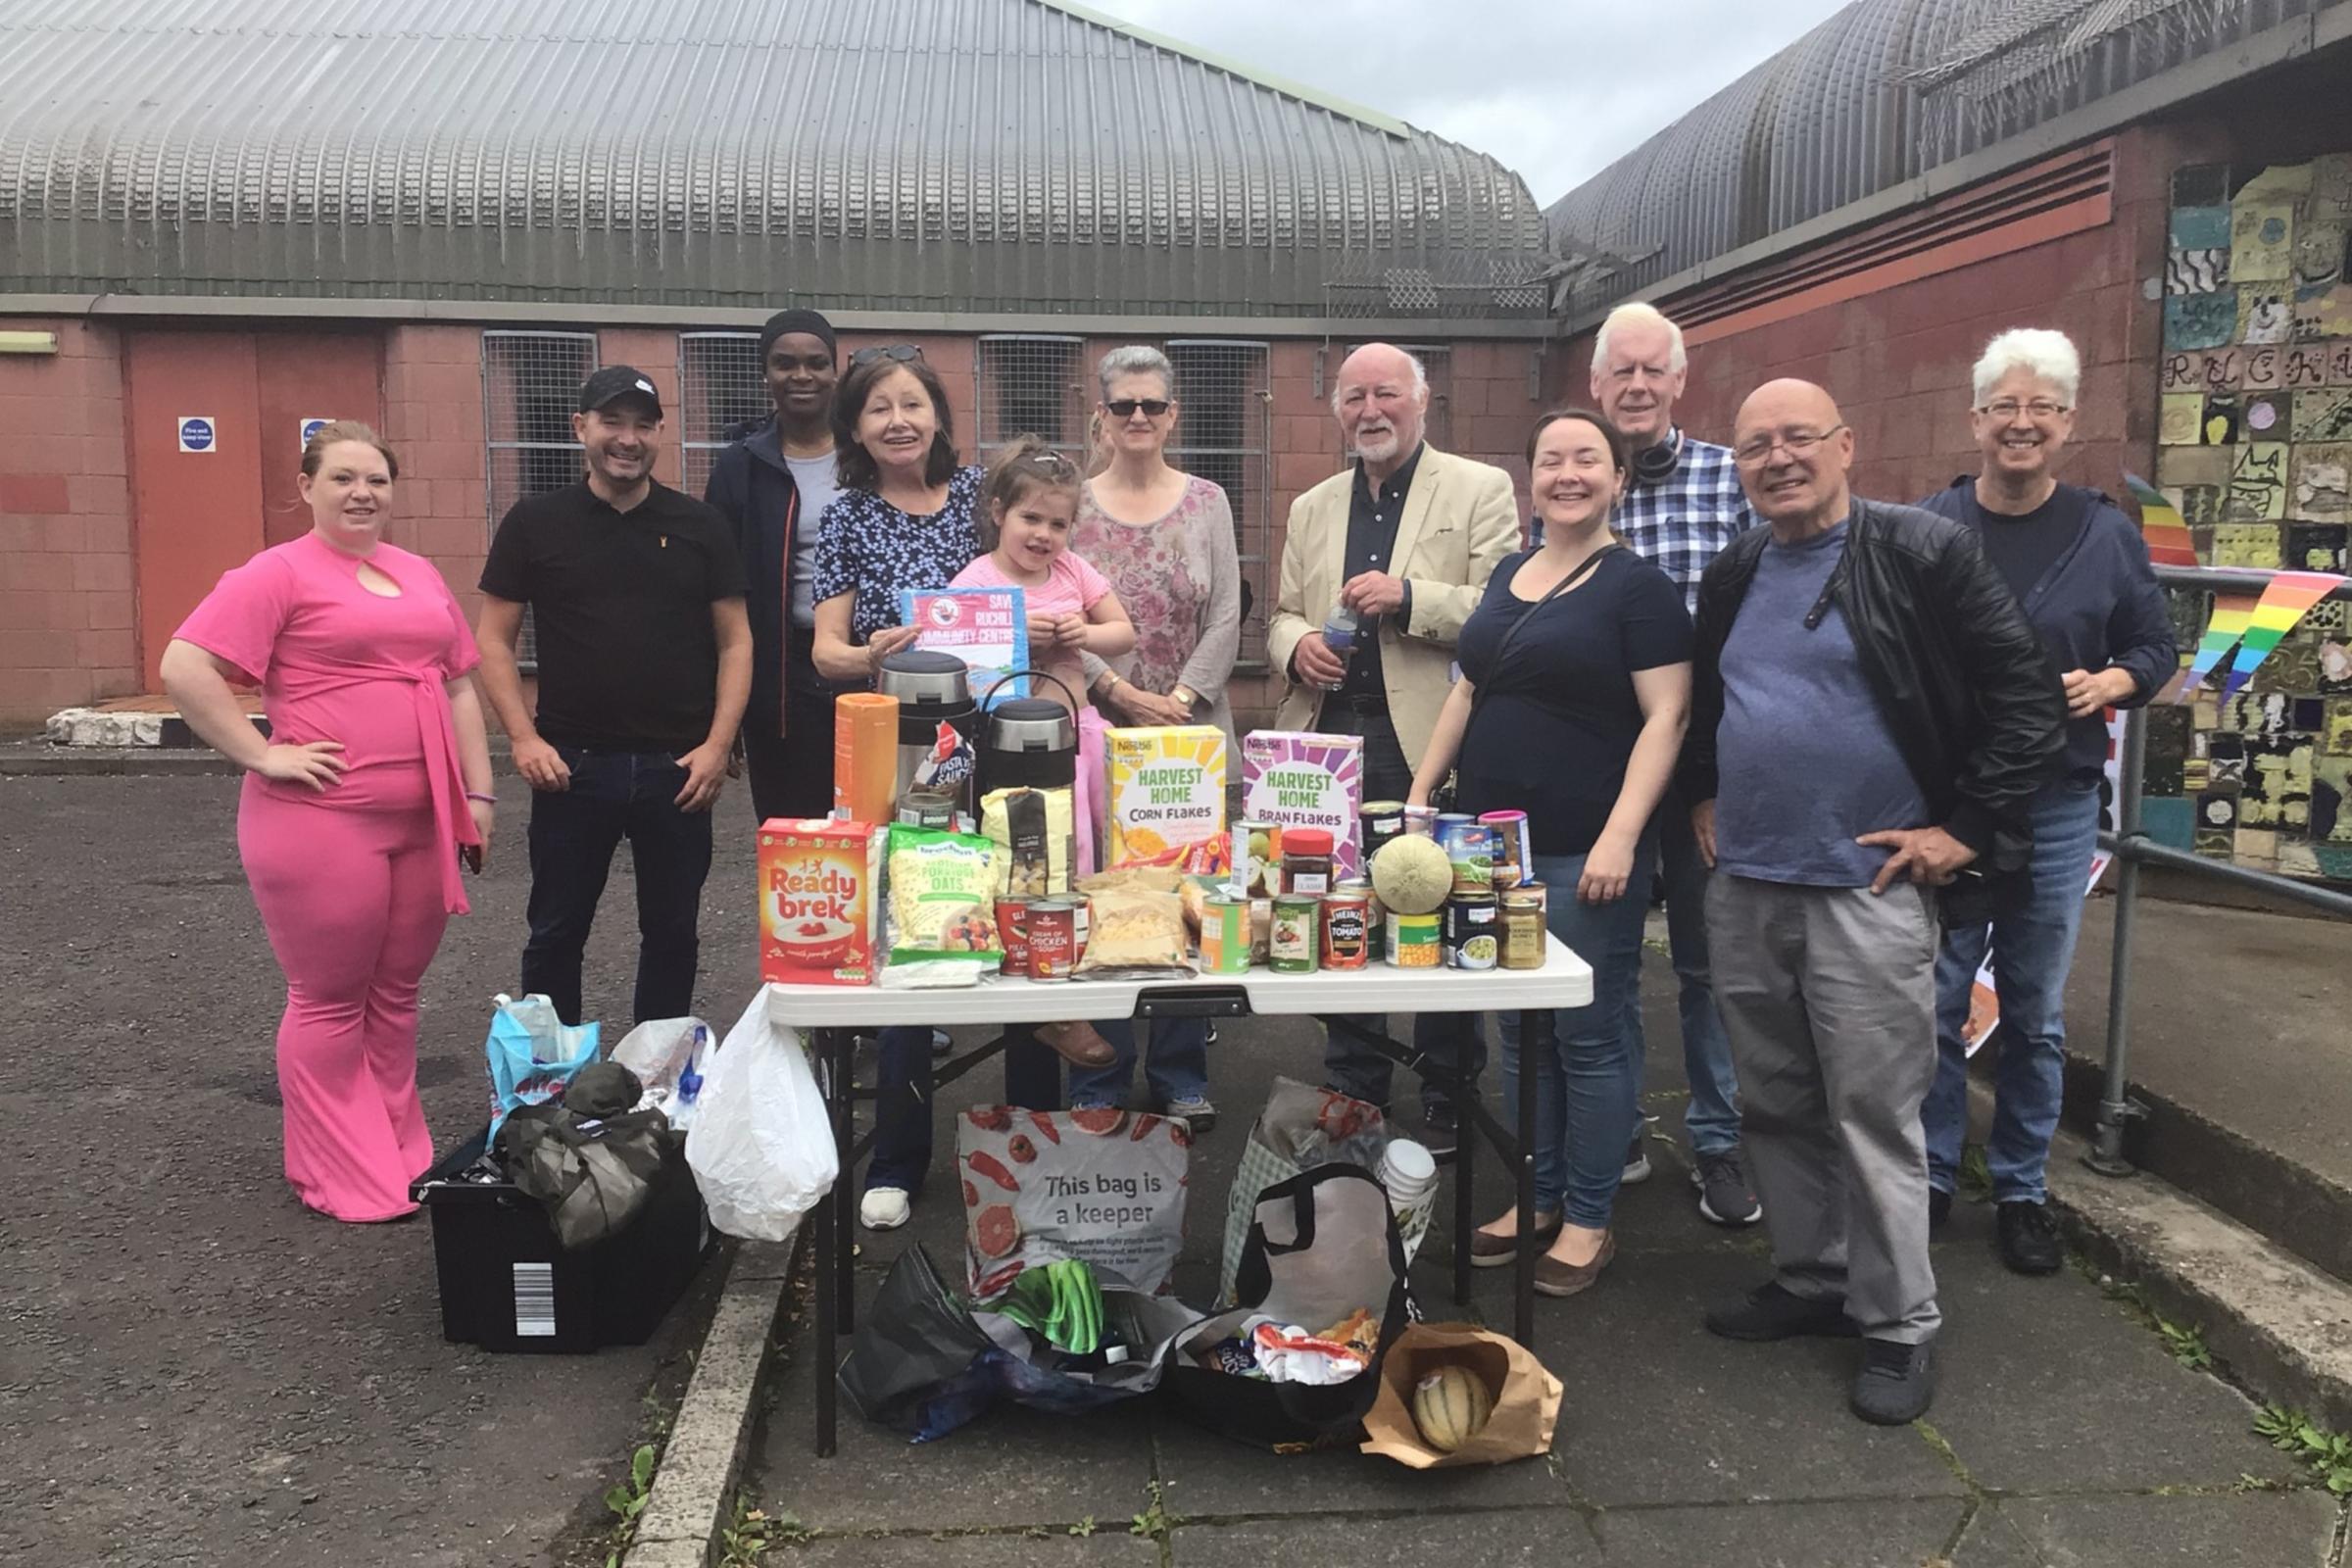 Glasgow Ruchill campaigners lend a helping hand to neighbours with food pantry collection